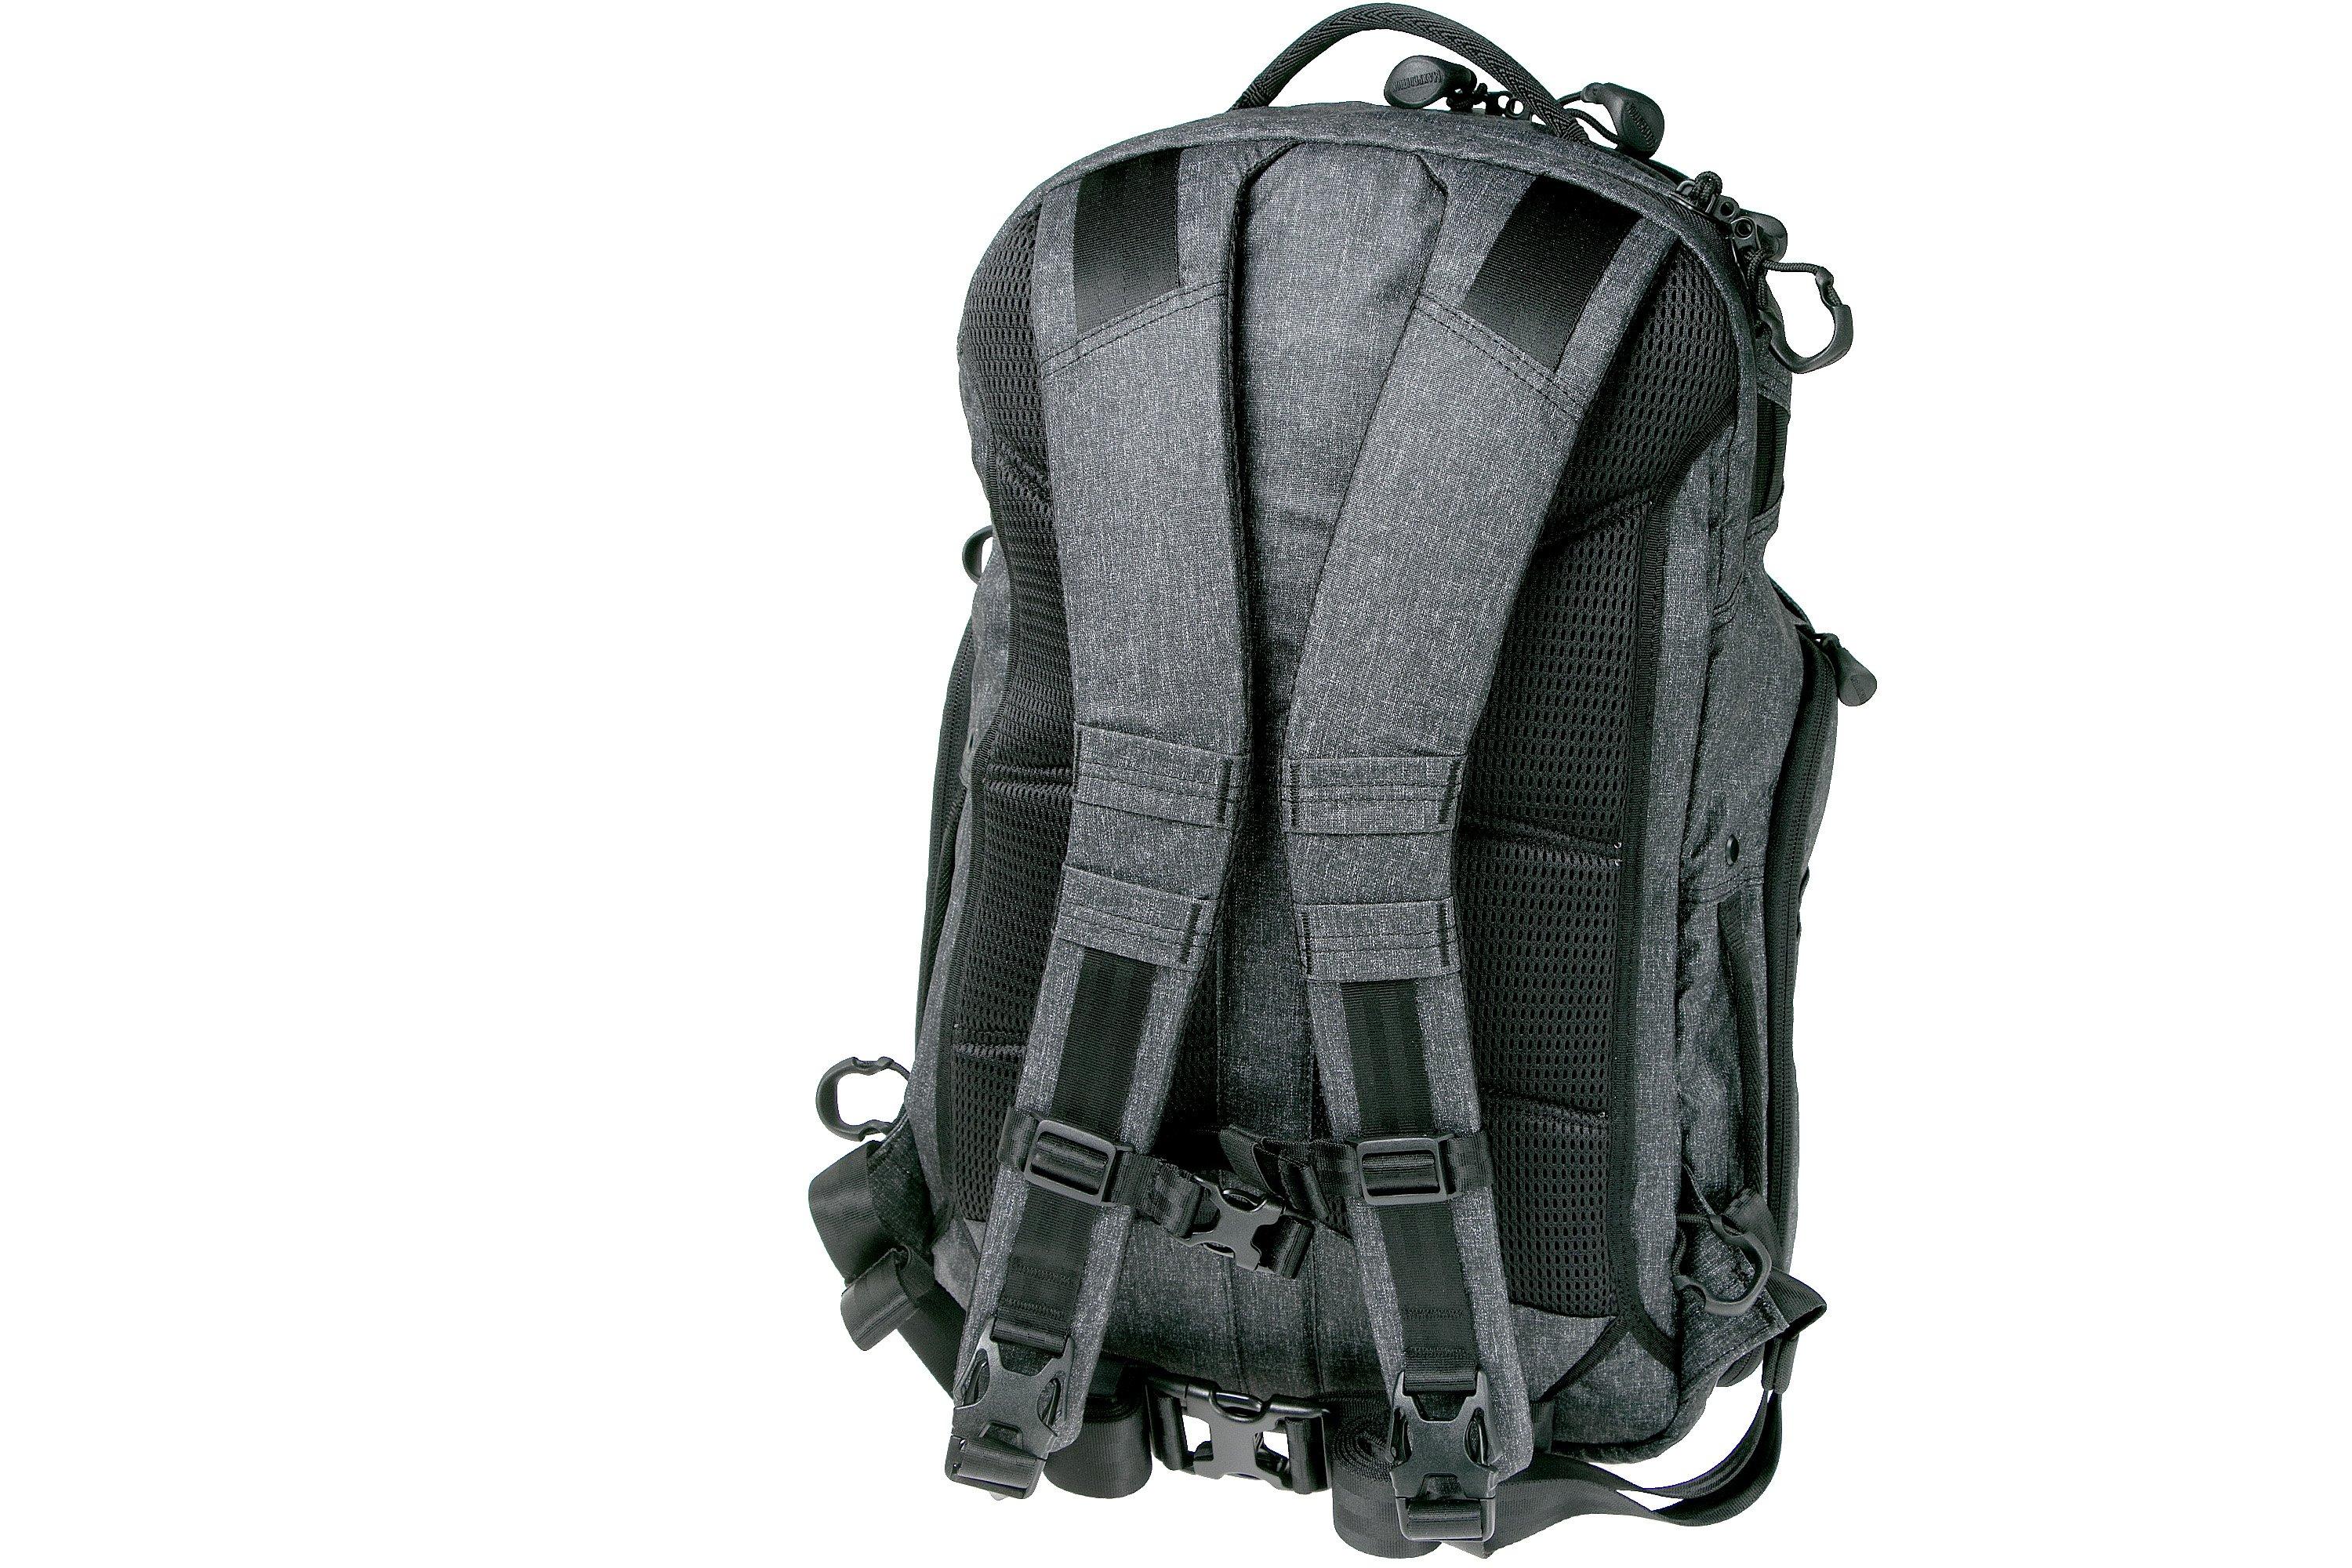 Maxpedition Entity 27 backpack 27L NTTPK27CH Advantageously shopping at 